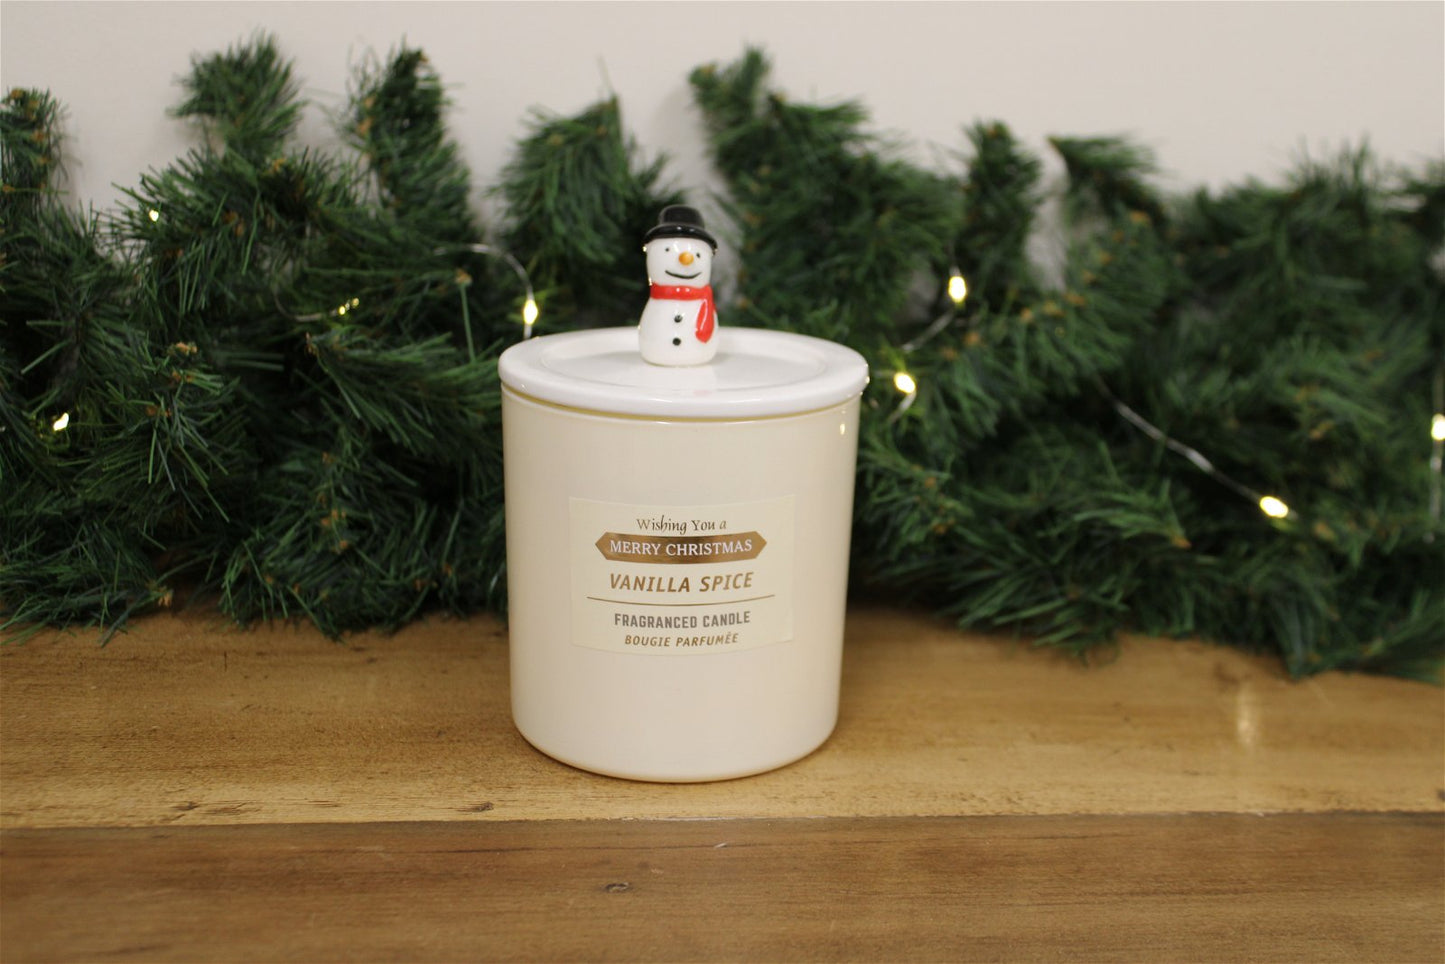 Snowman Character Candle-pot